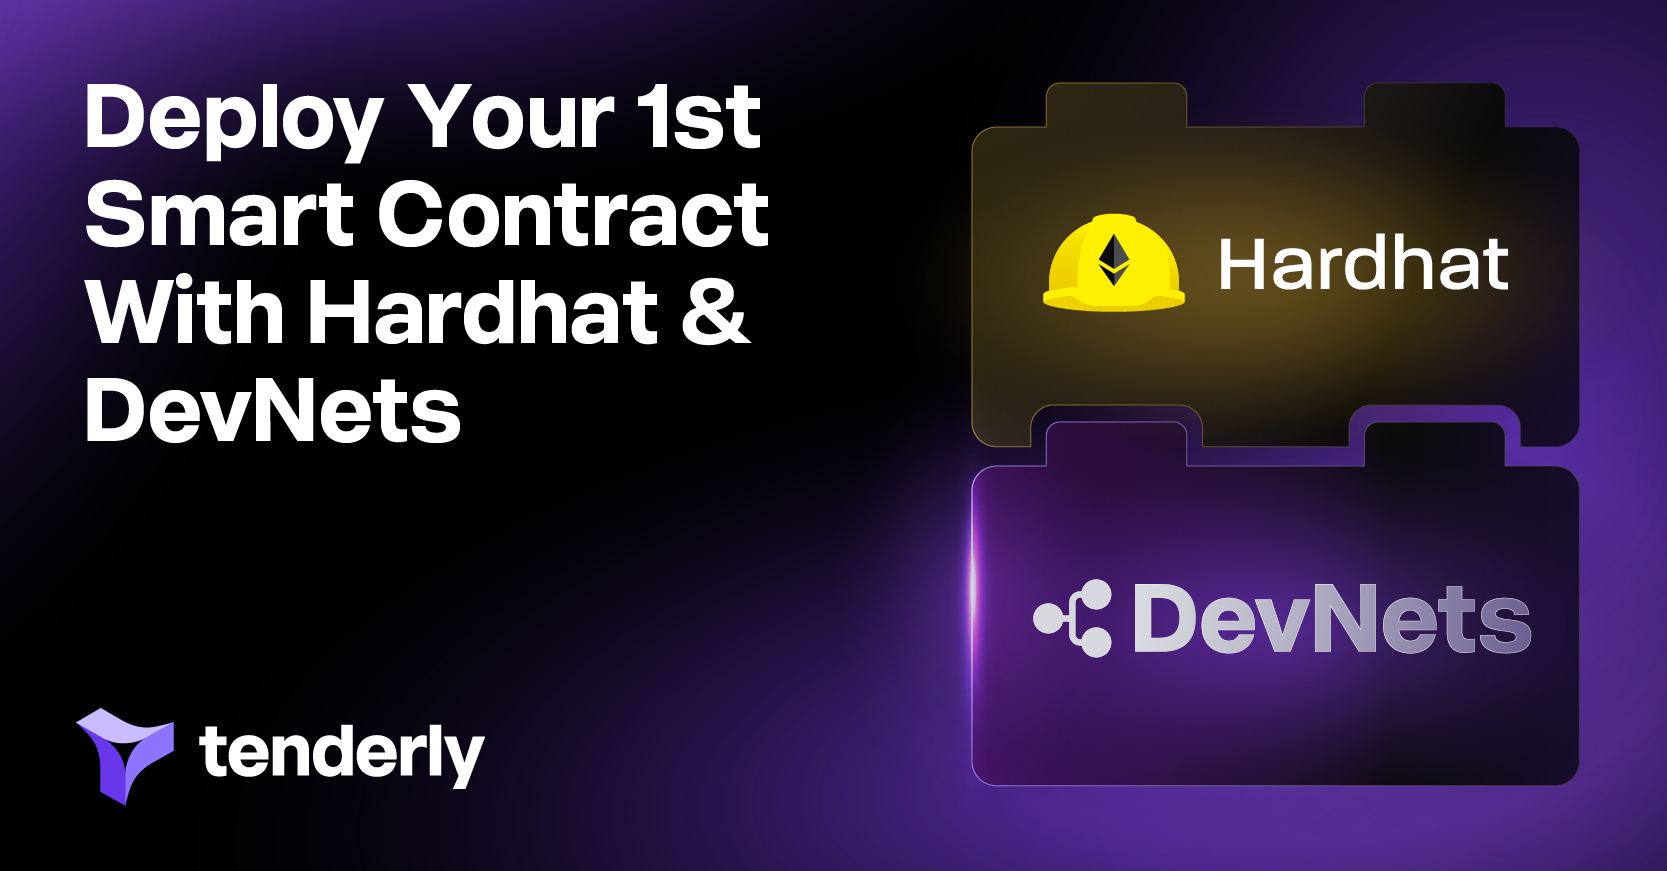 How to deploy smart contract to ethereum using hardhat and tenderly devnets